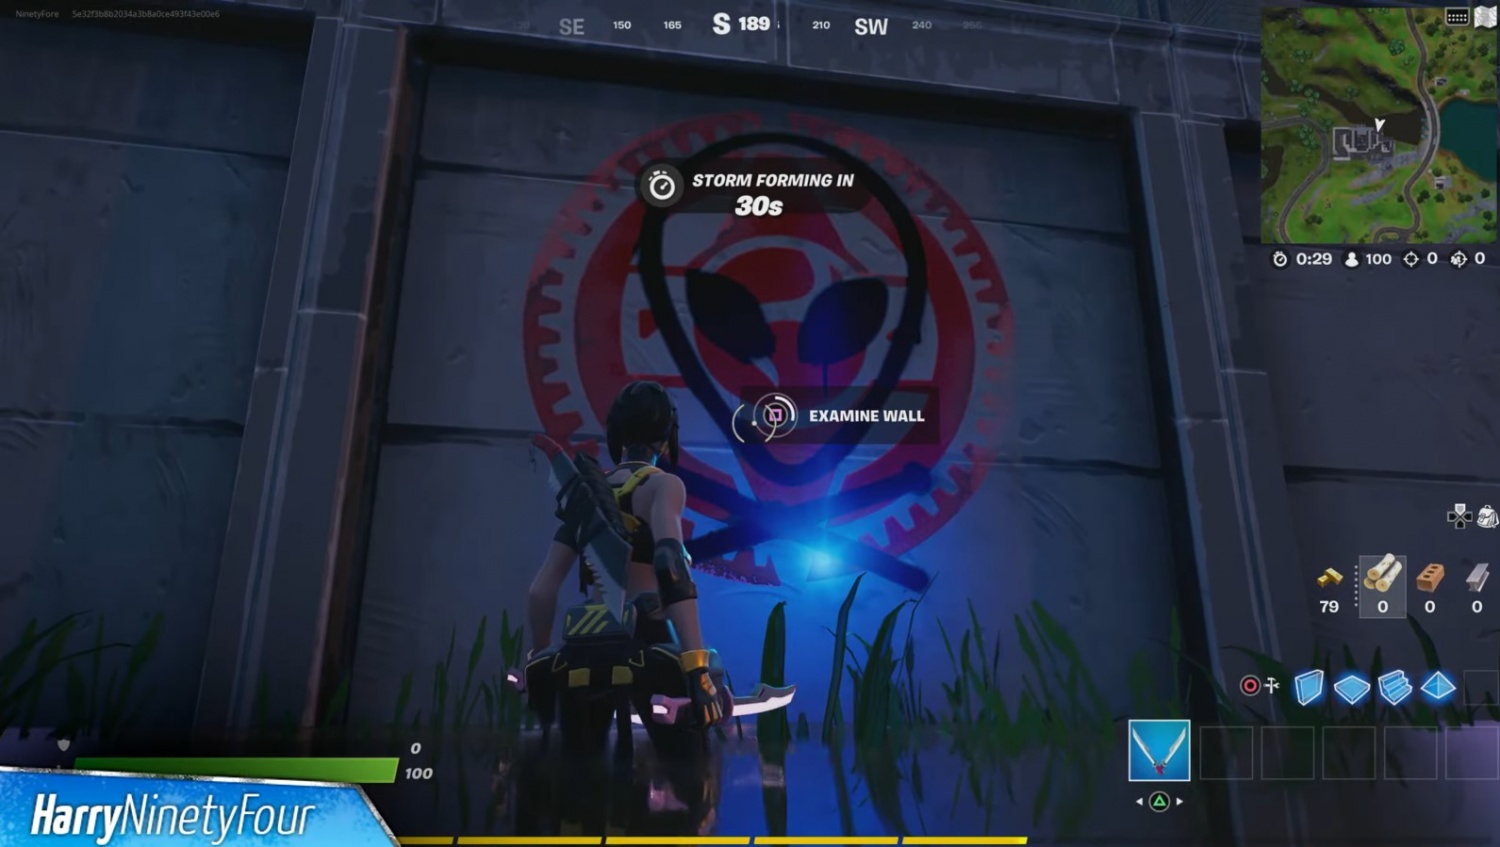 Fortnite Where To Search For Graffiti Covered Walls Collect Spray Cans Chapter 2 Season 7 Week 2 Epic Quest Guide Games Gamenguide